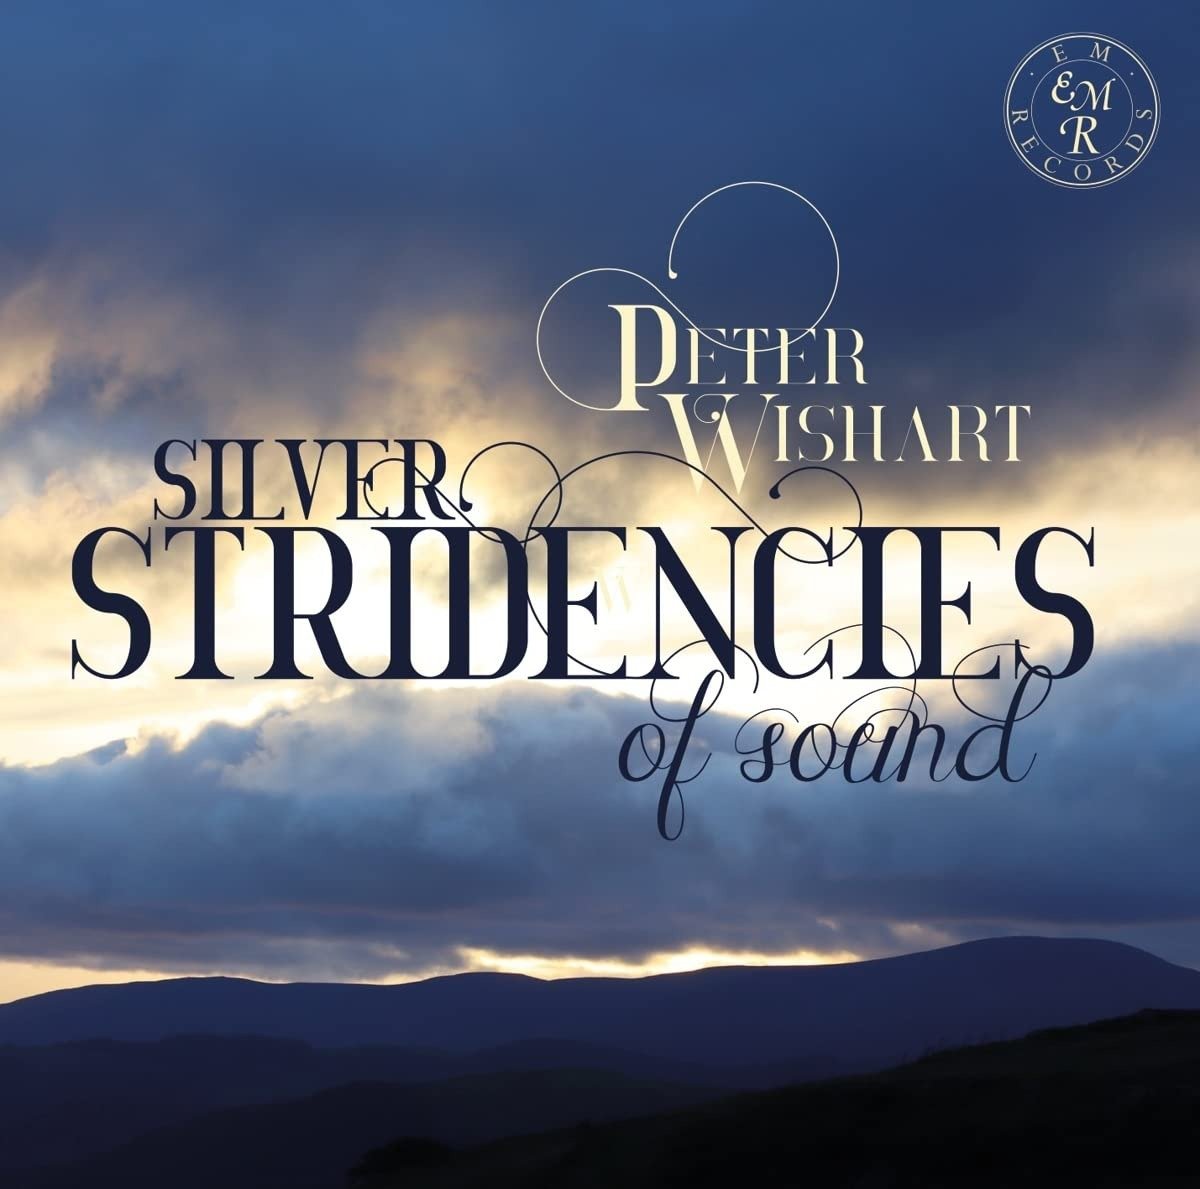 CD Shop - WILLIAMS, JEREMY HUW / TI SILVER STRIDENCIES OF SOUNDS: THE SONGS OF PETER WISHART